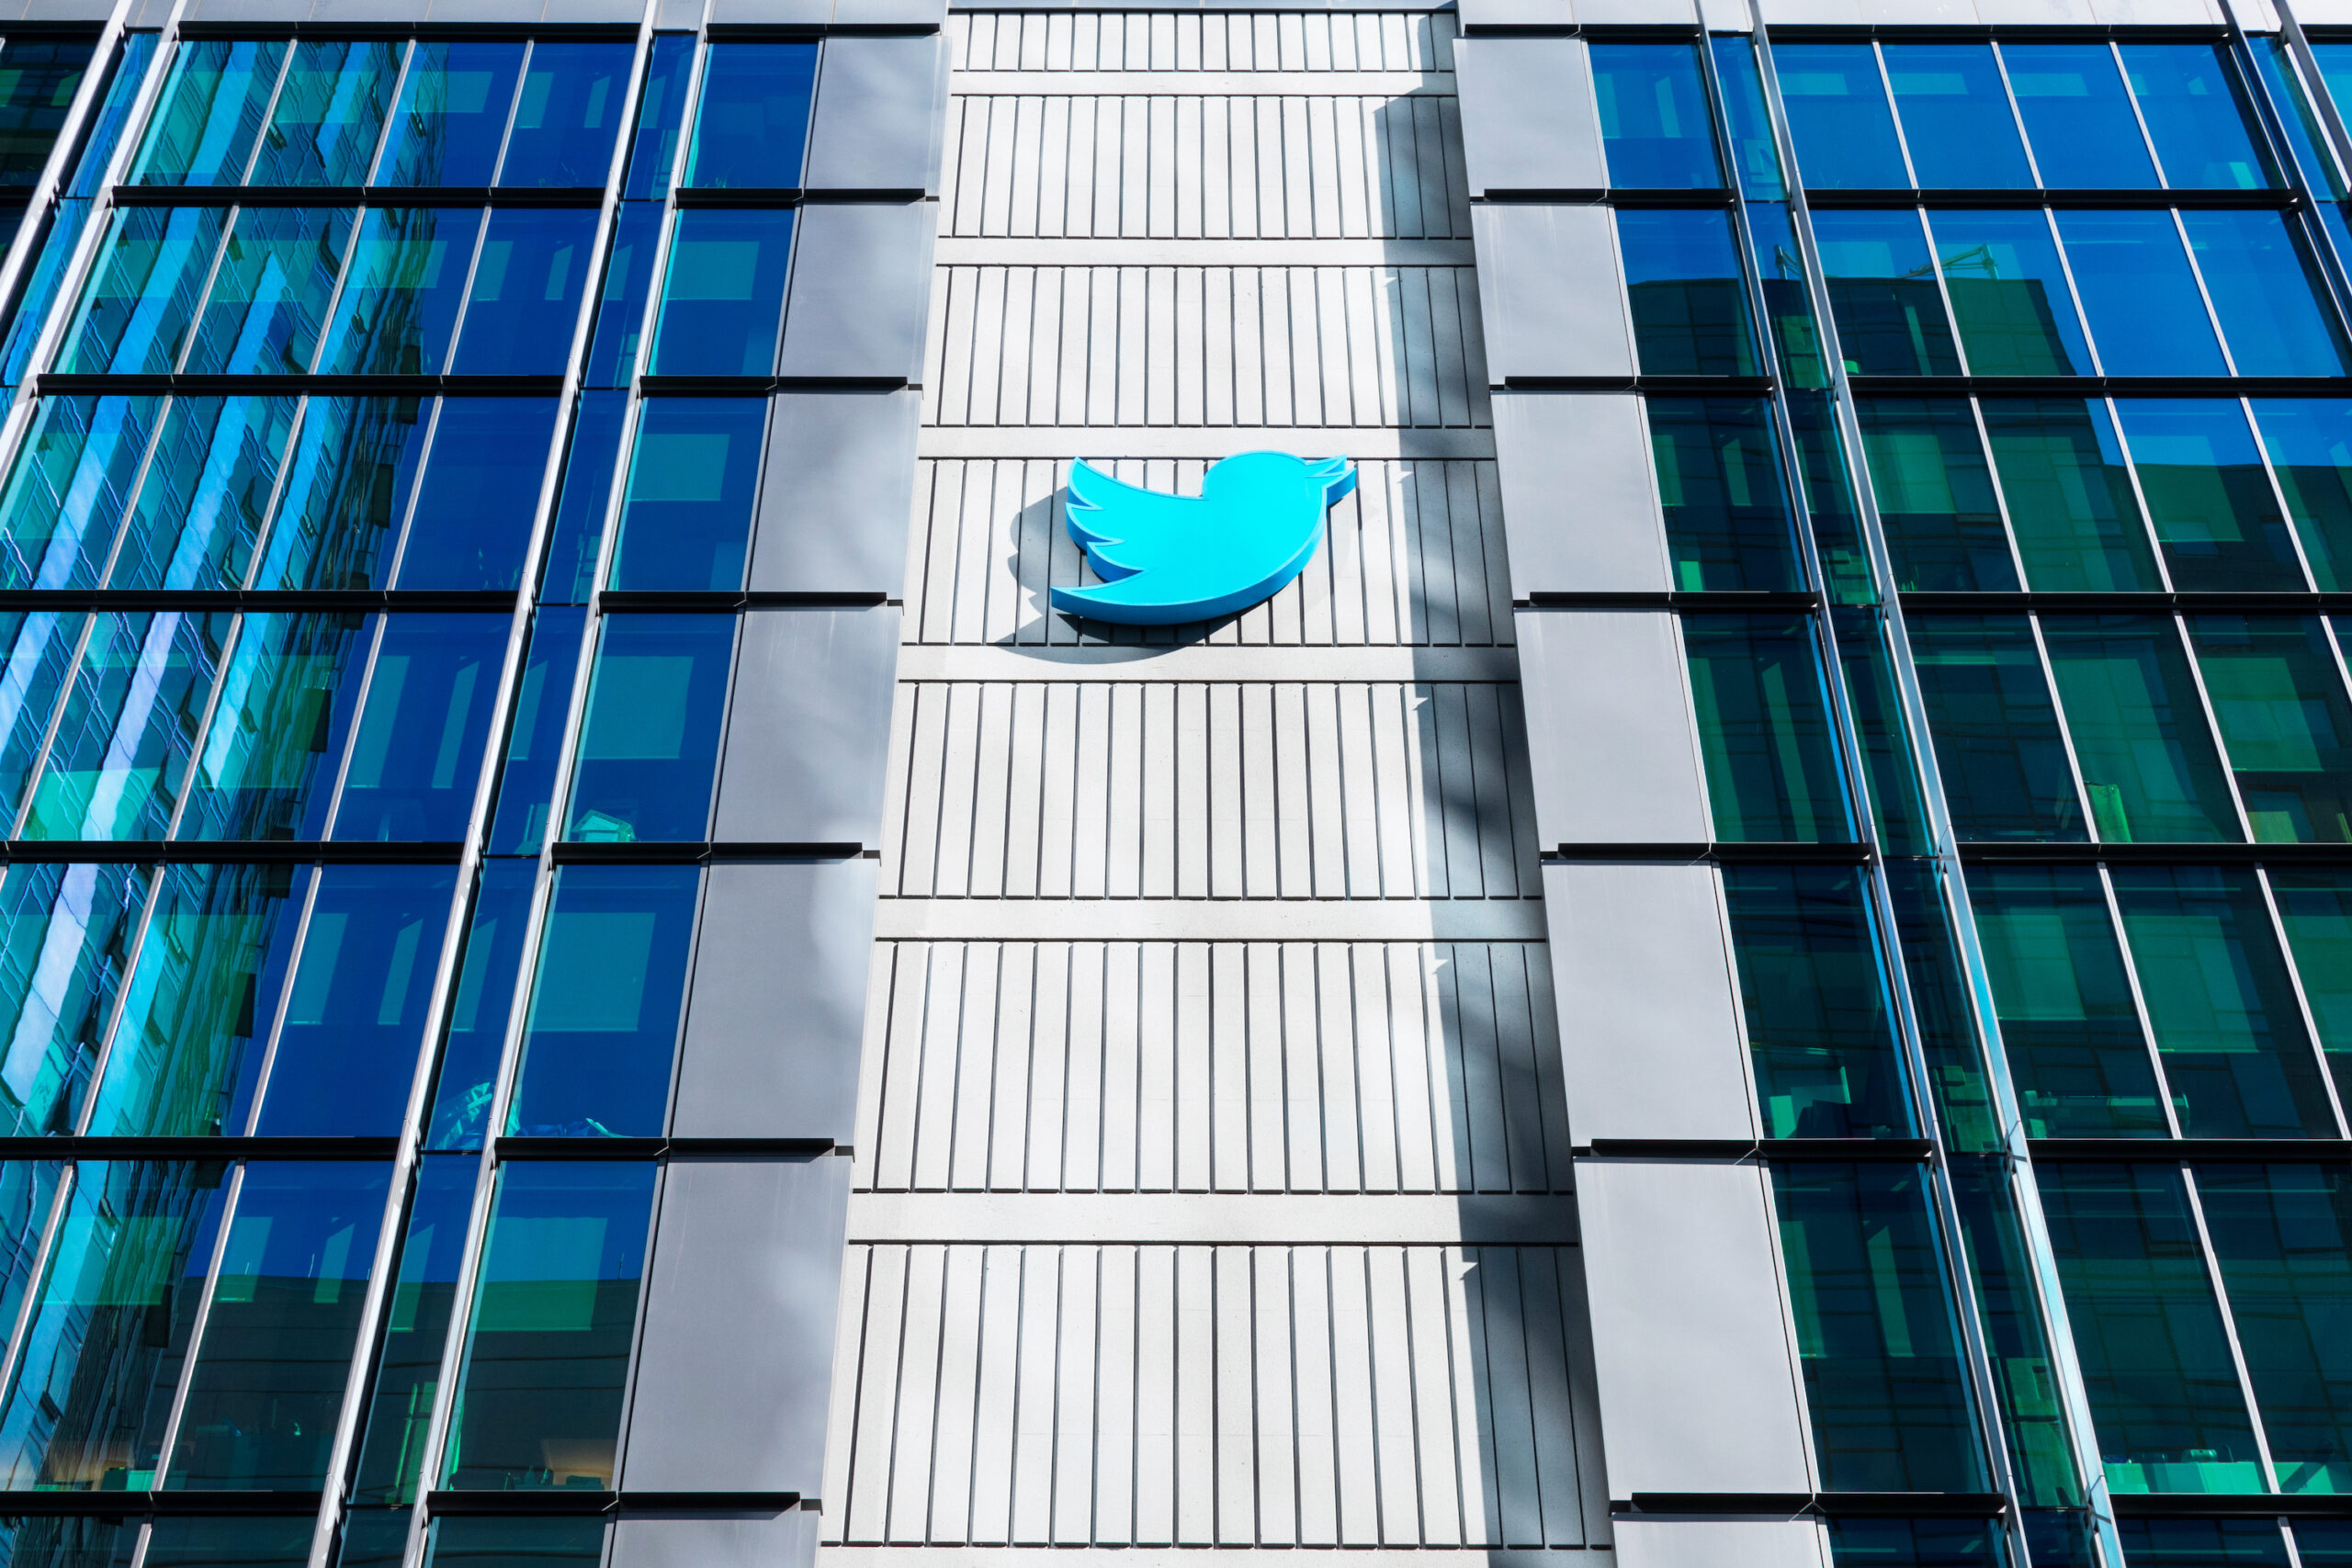 Twitter HQ campus in downtown San Francisco.